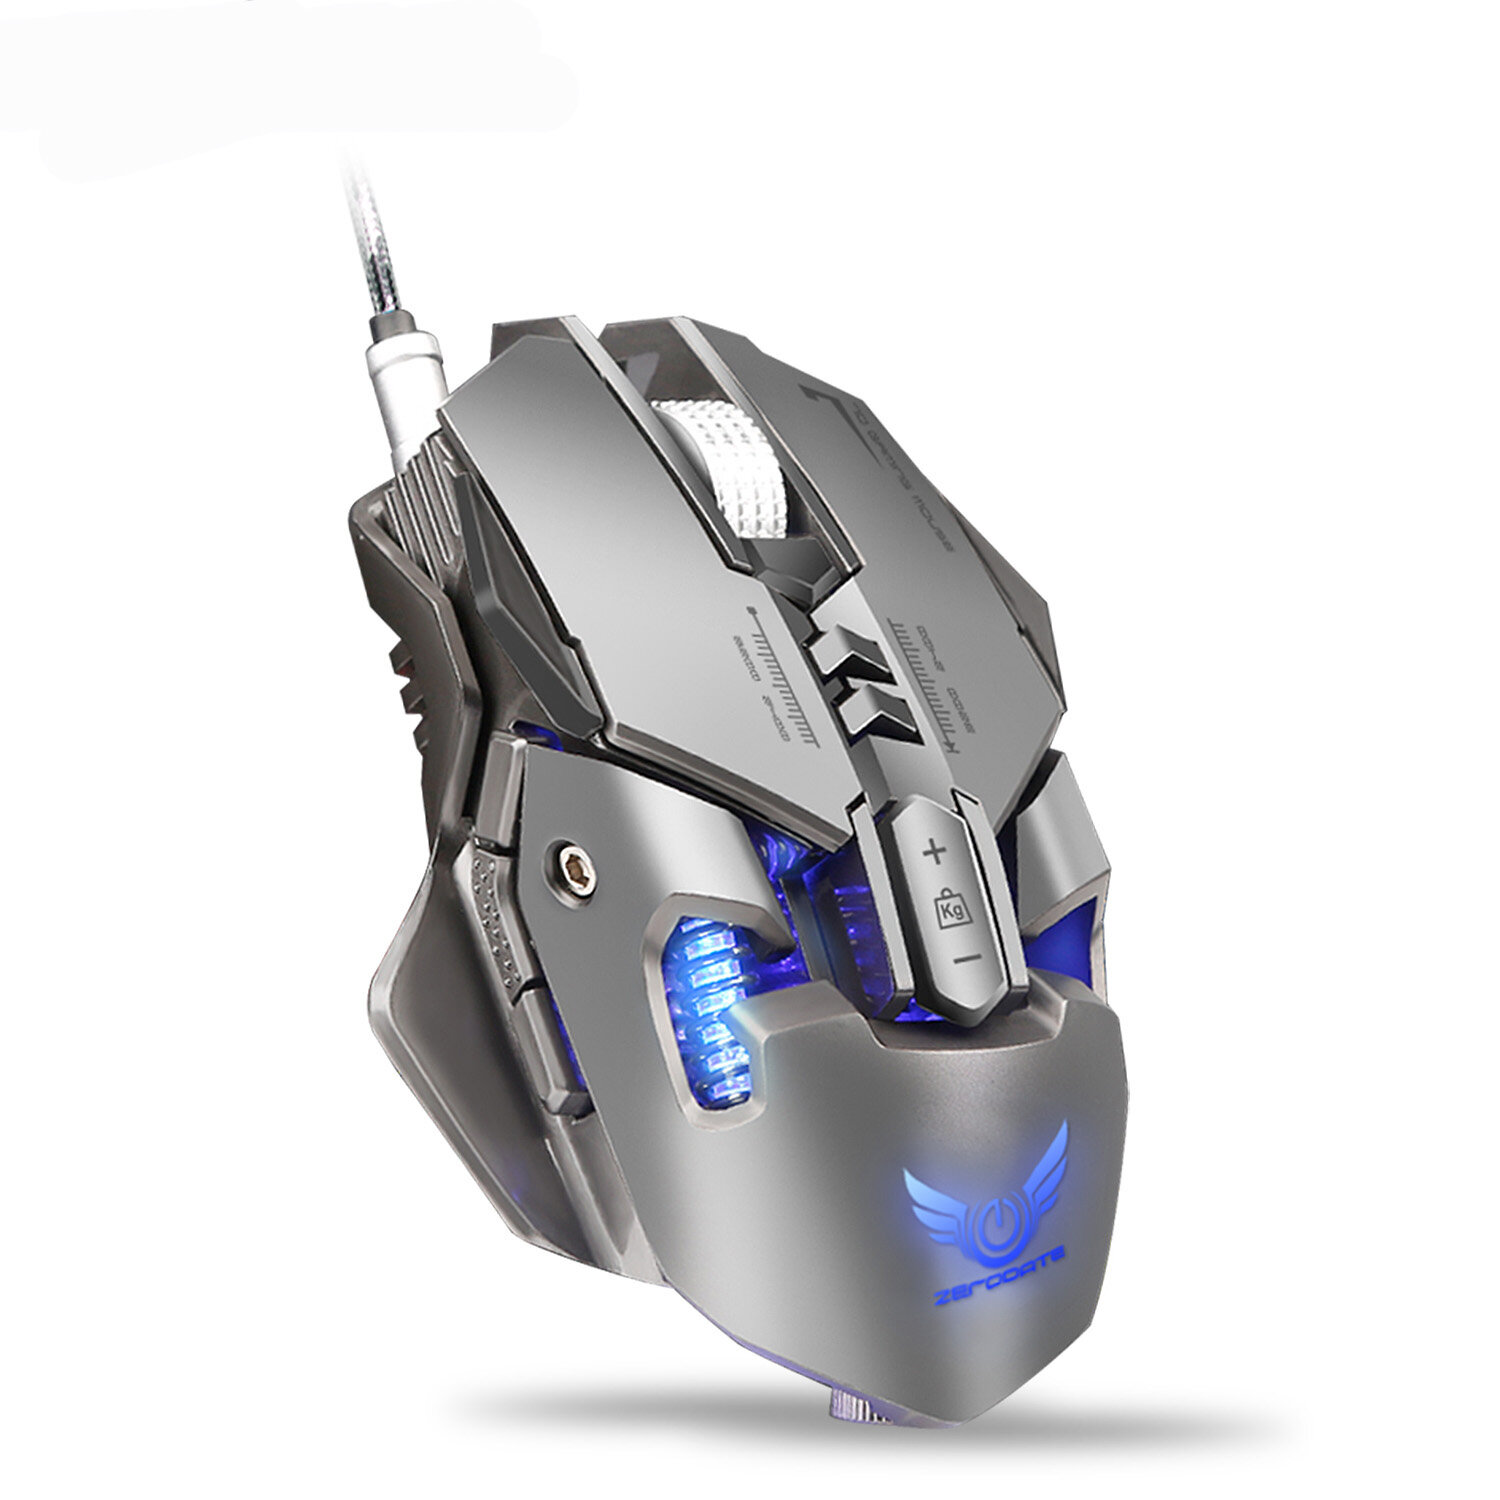 best price,zerodate,x300gy,mouse,discount